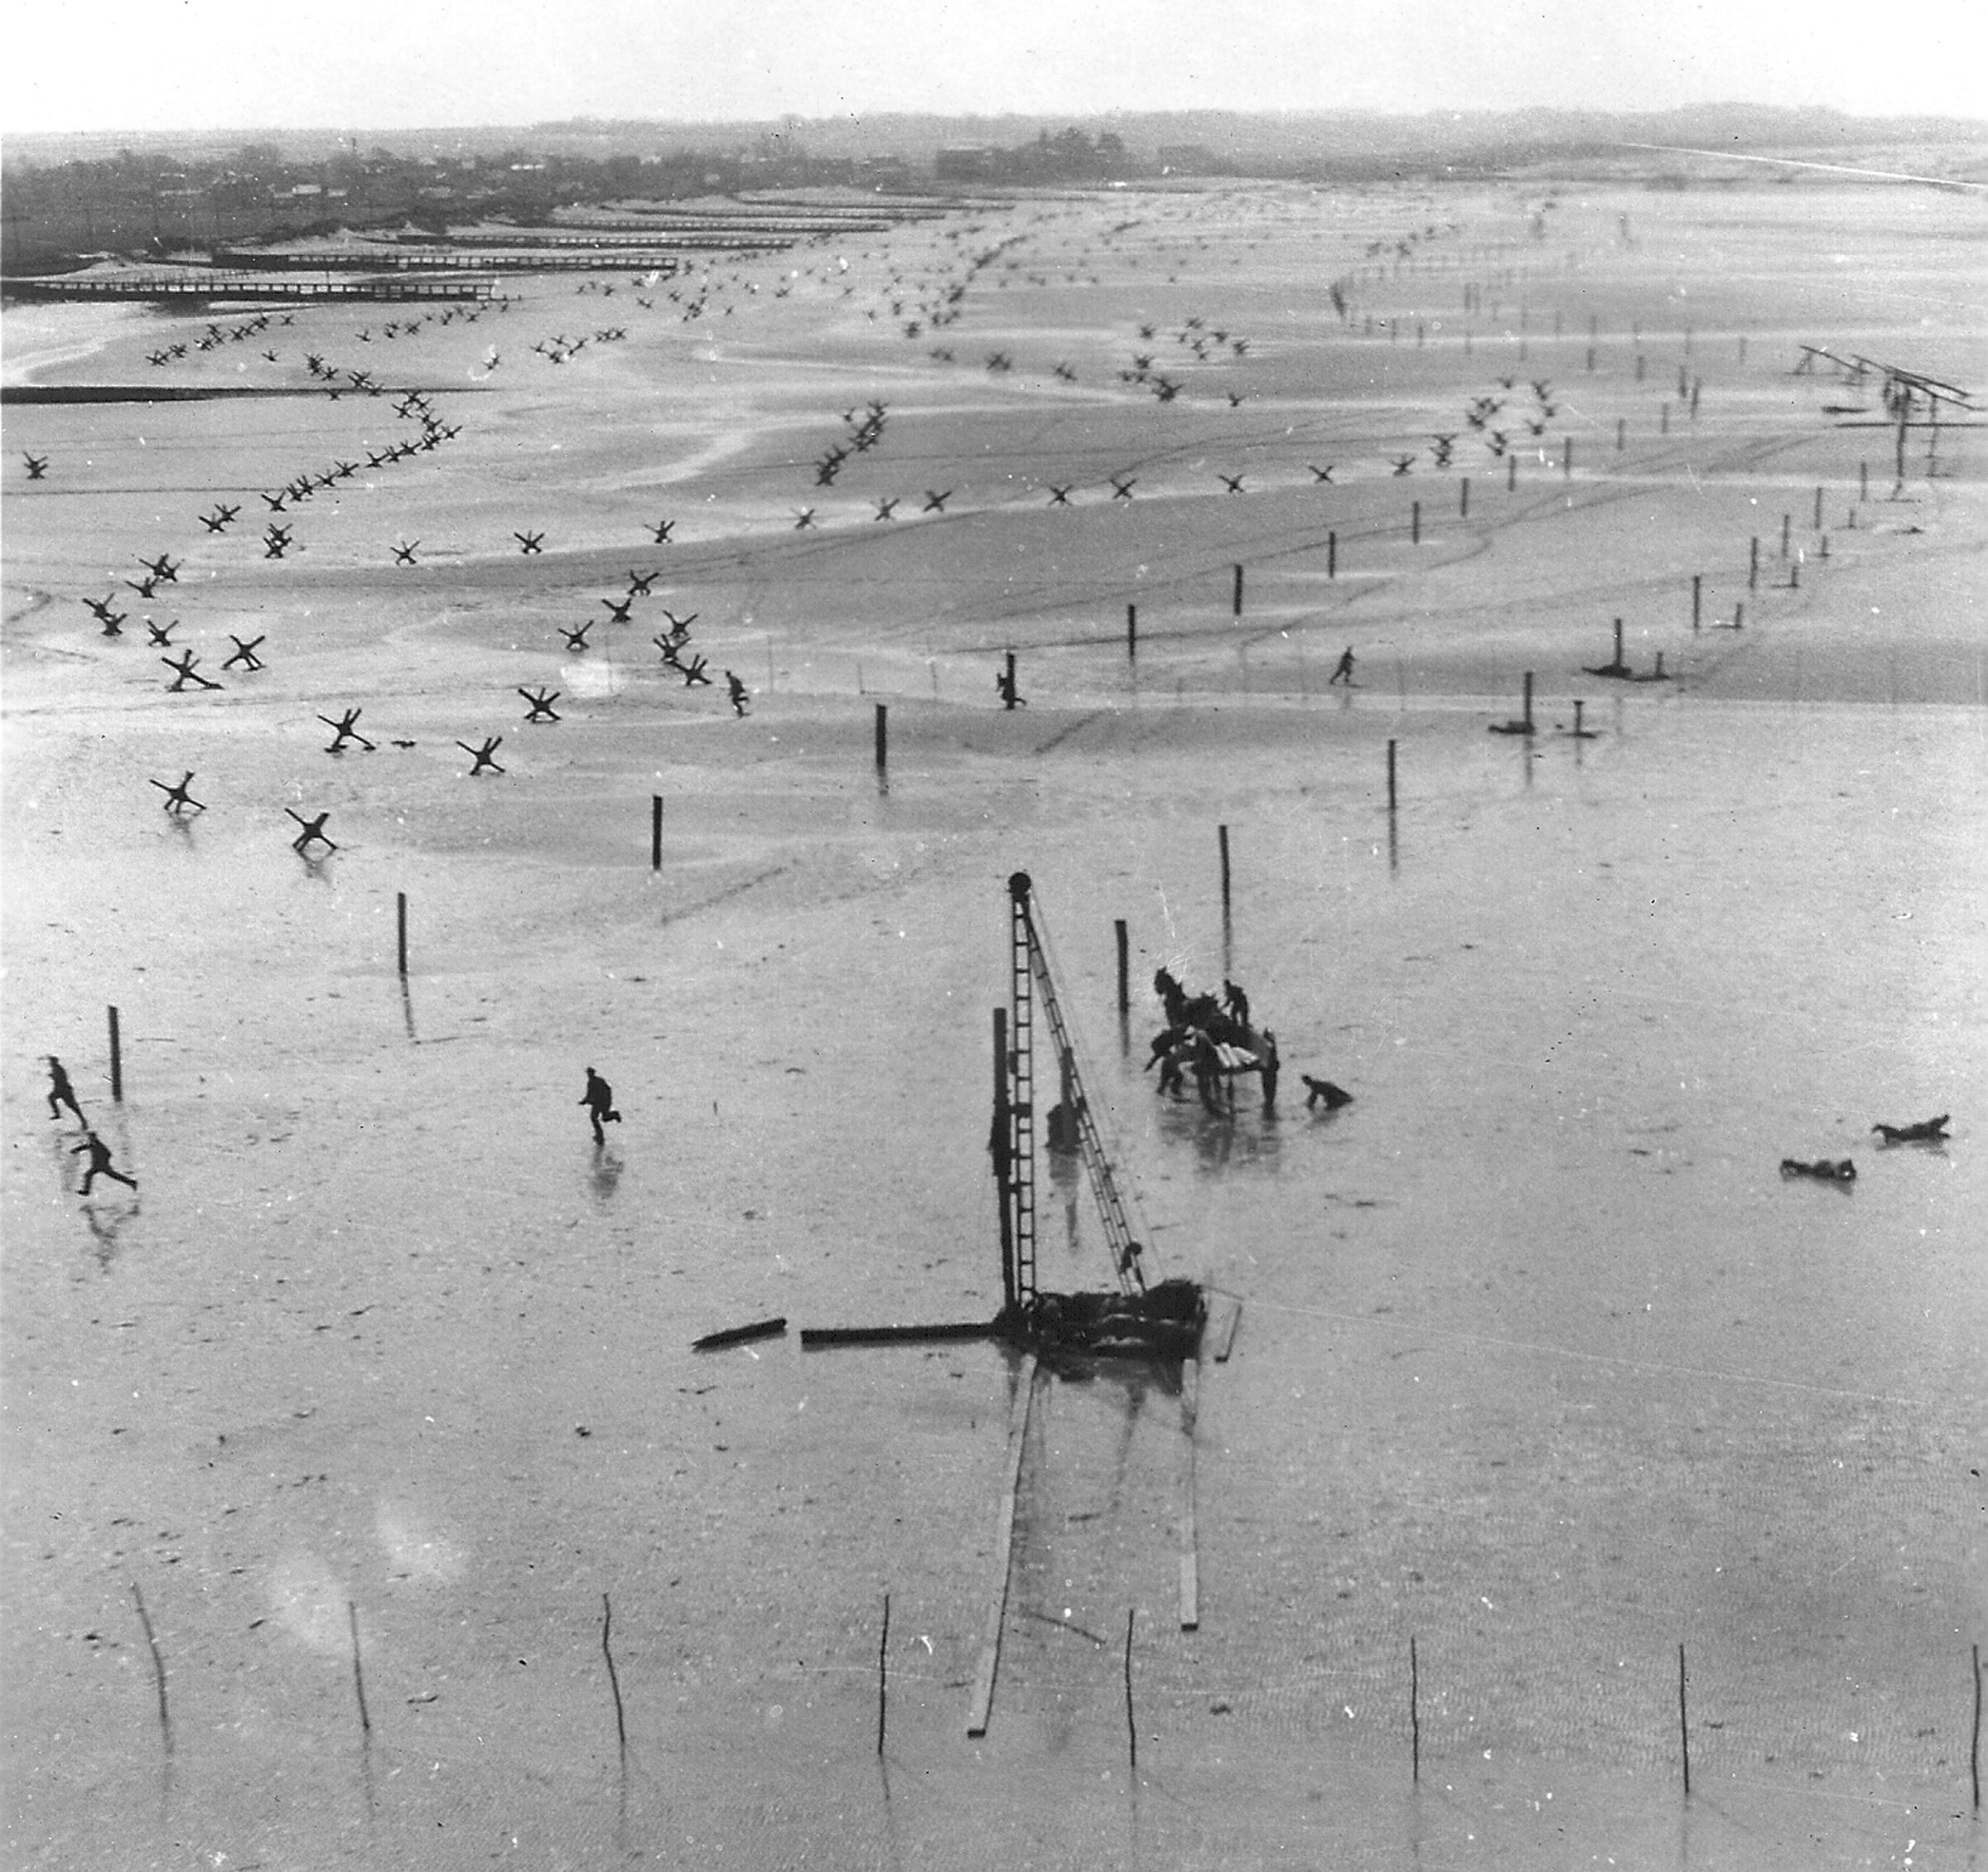 A camera plane recorded this low-angle scene of German troops installing obstacles along Normandy’s Omaha Beach and running for cover shortly before the Allied invasion. (photo by U.S. Army Air Forces)